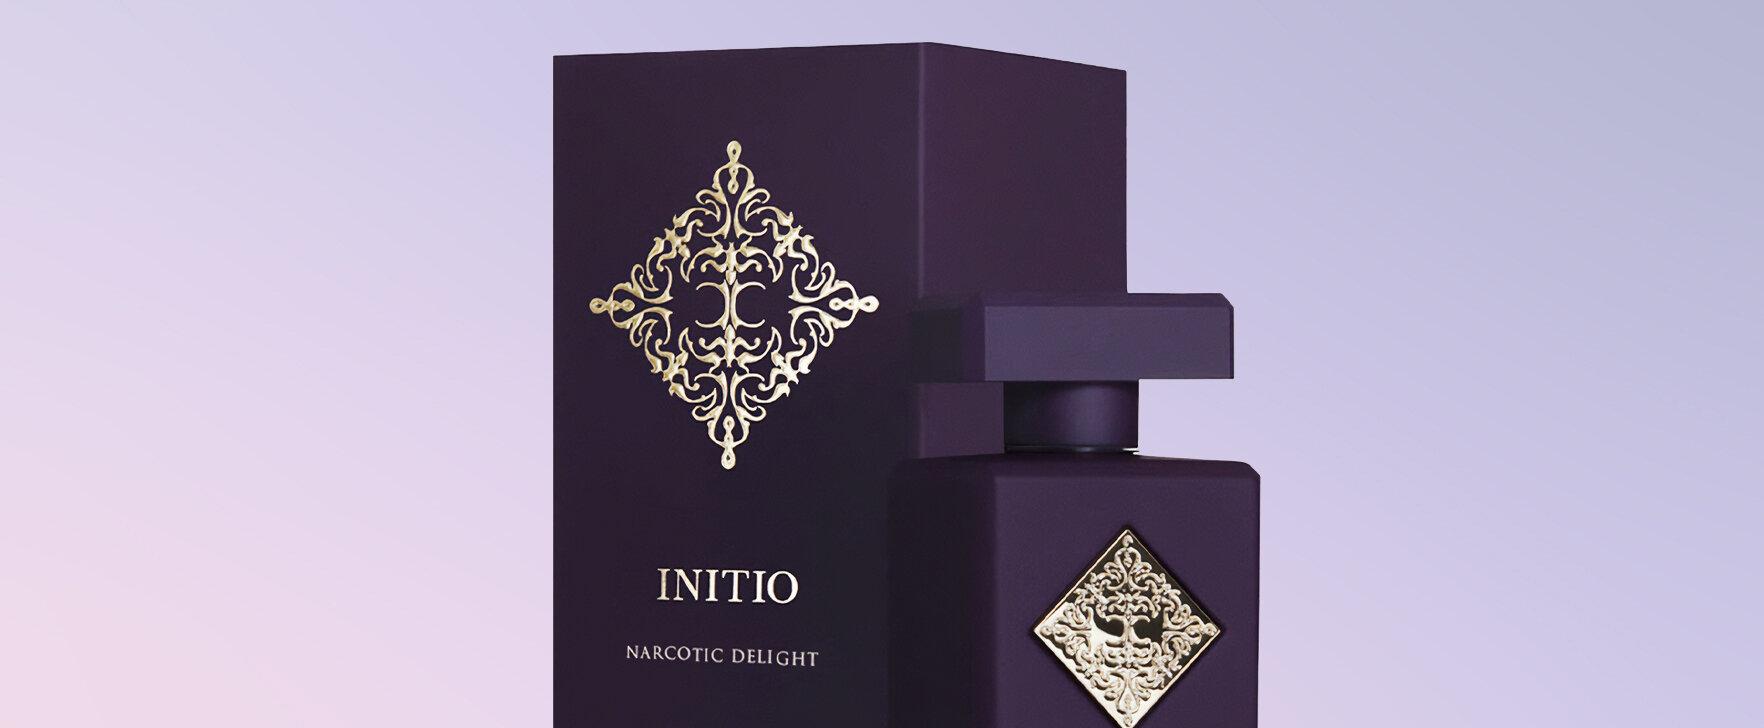 A Sensual Dash of Provocation: The New Eau de Parfum "Narcotic Delight" From Initio